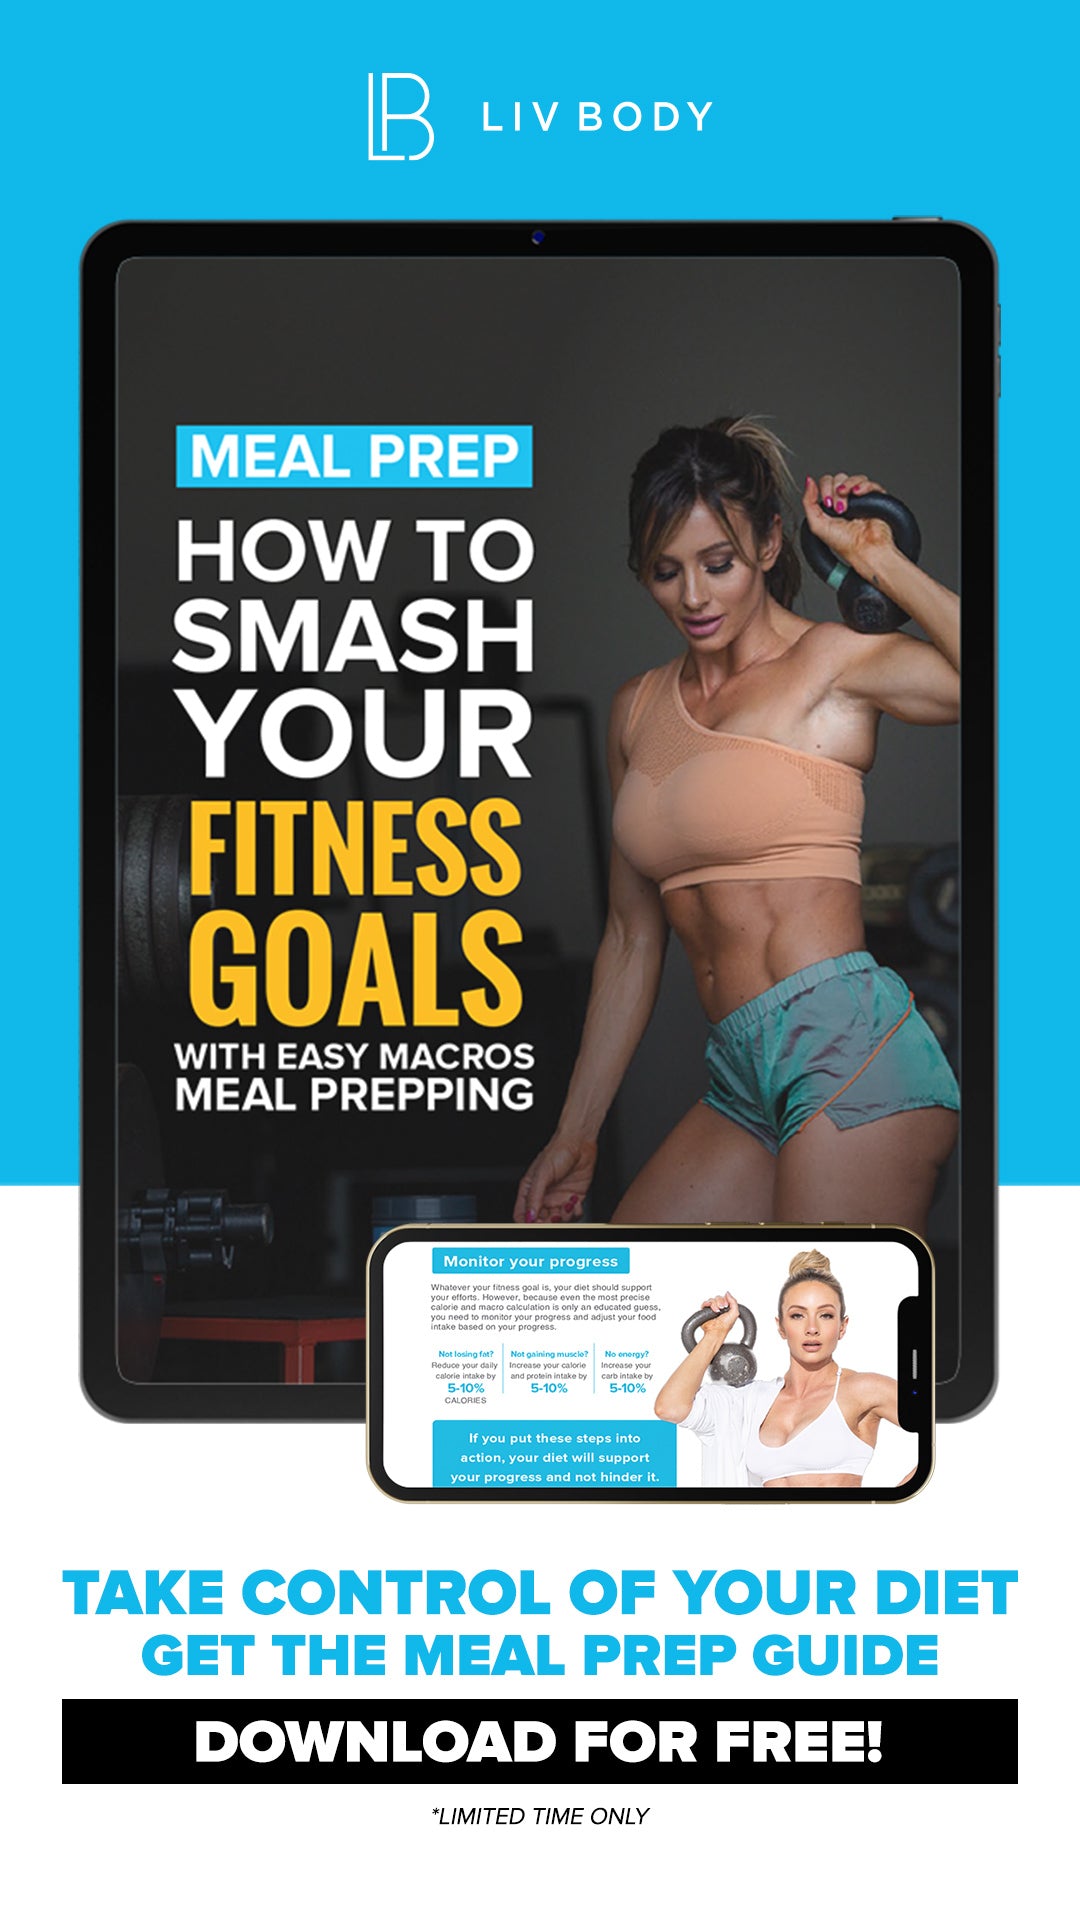 How To Smash Your Fitness Goals